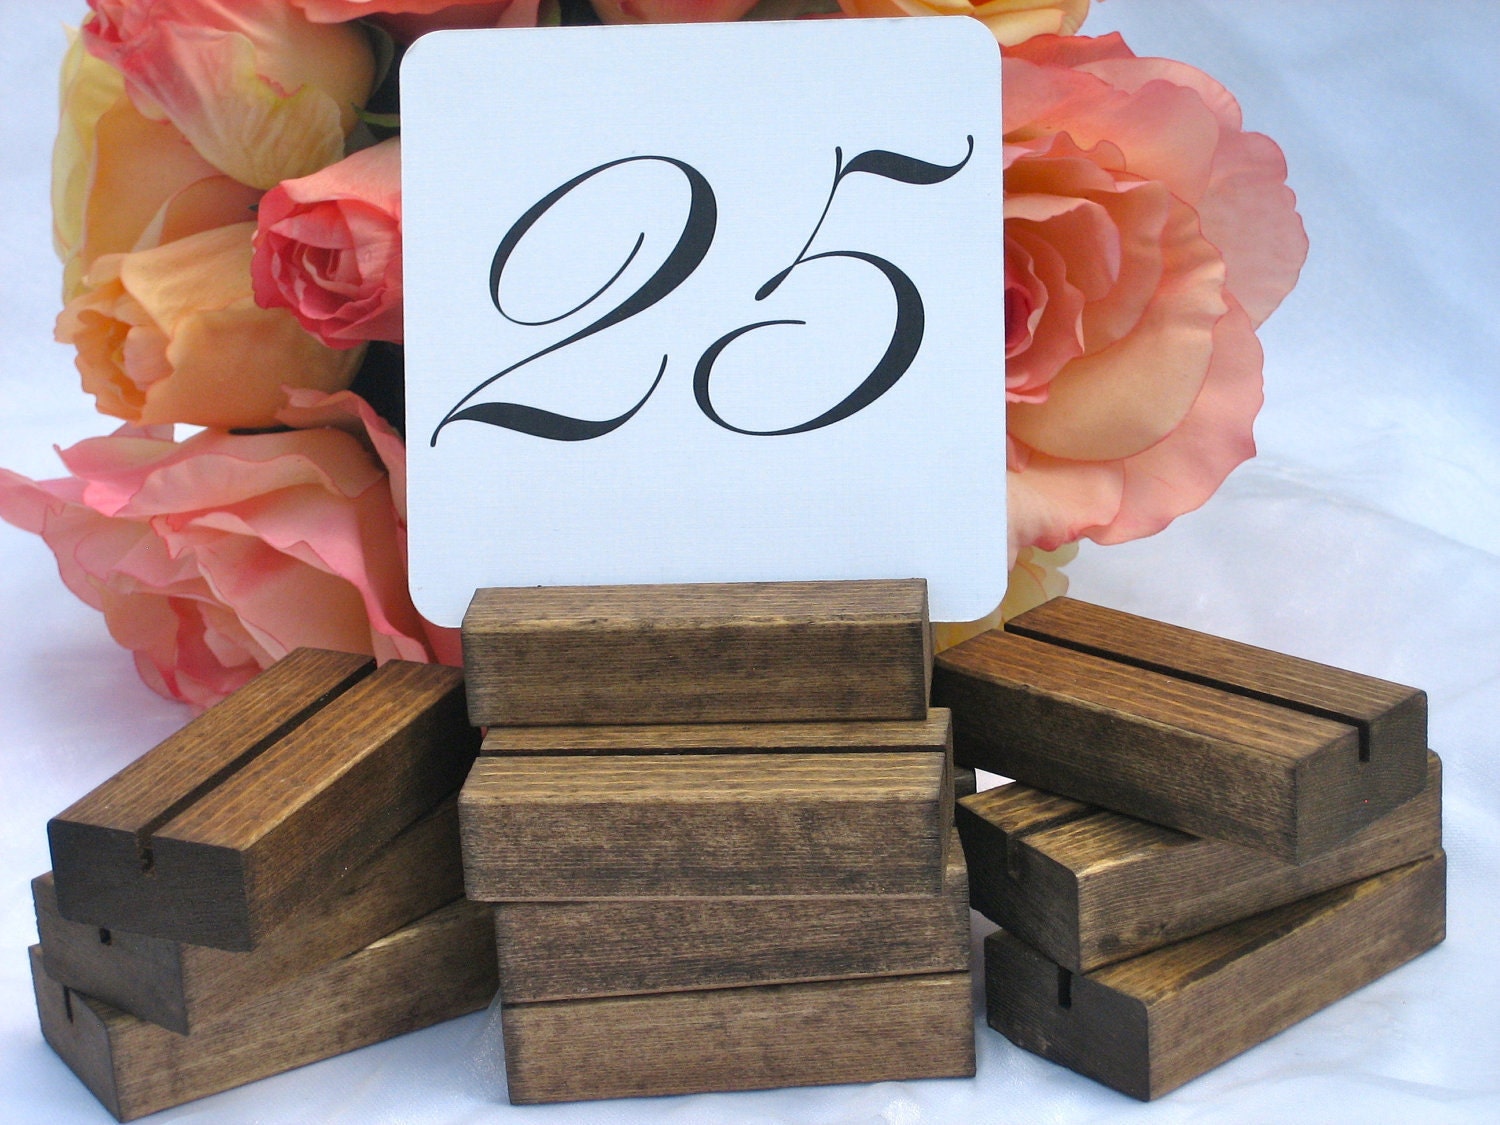 Table Set holders  Gallery360 rustic Wedding of Wood by 25 Holders Number table Rustic sign